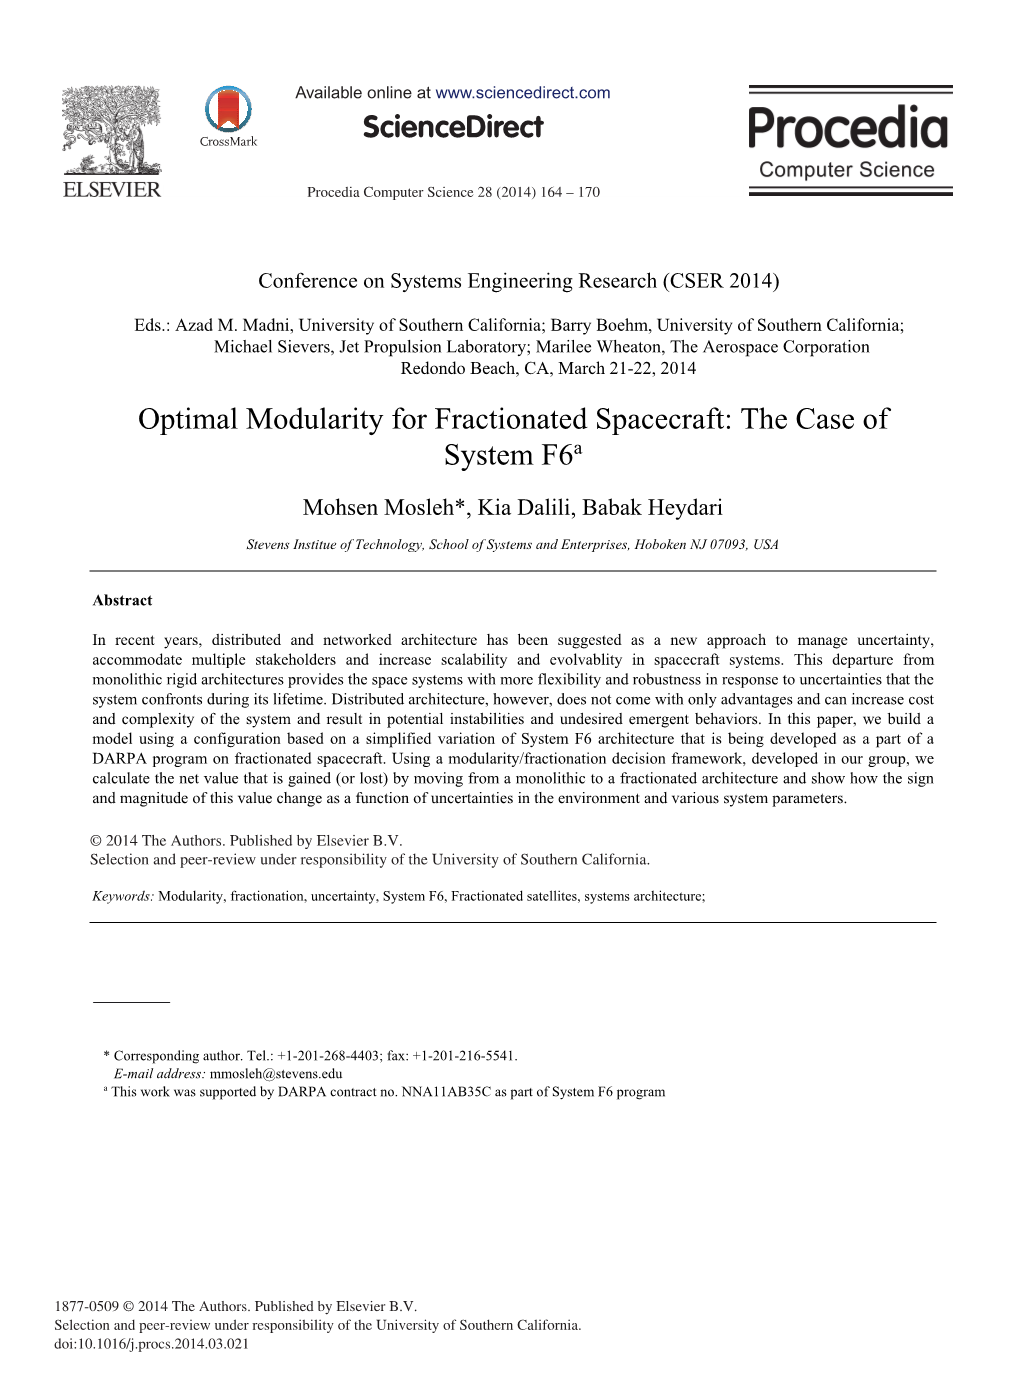 Optimal Modularity for Fractionated Spacecraft: the Case of System F6a